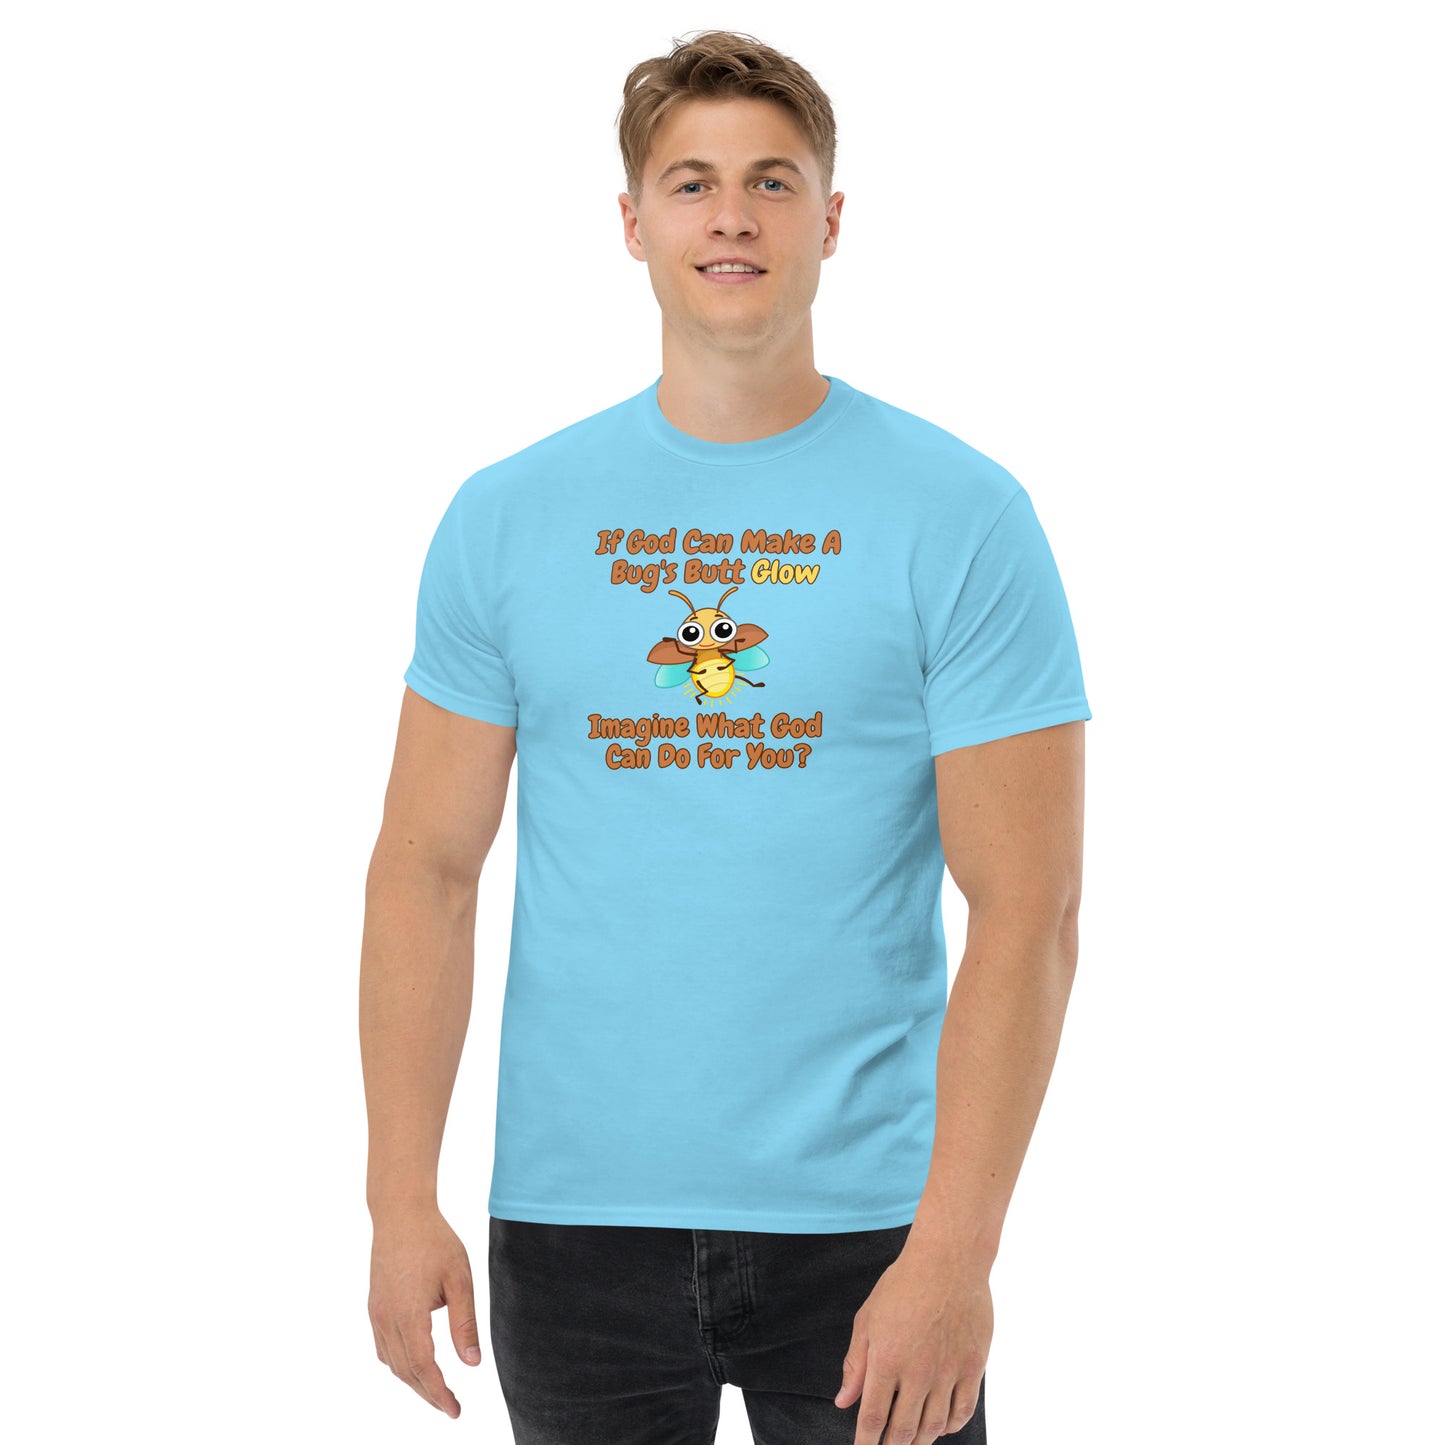 If God Can Make A Bug's Butt Glow Imagine What God Can Do For You Men's classic tee